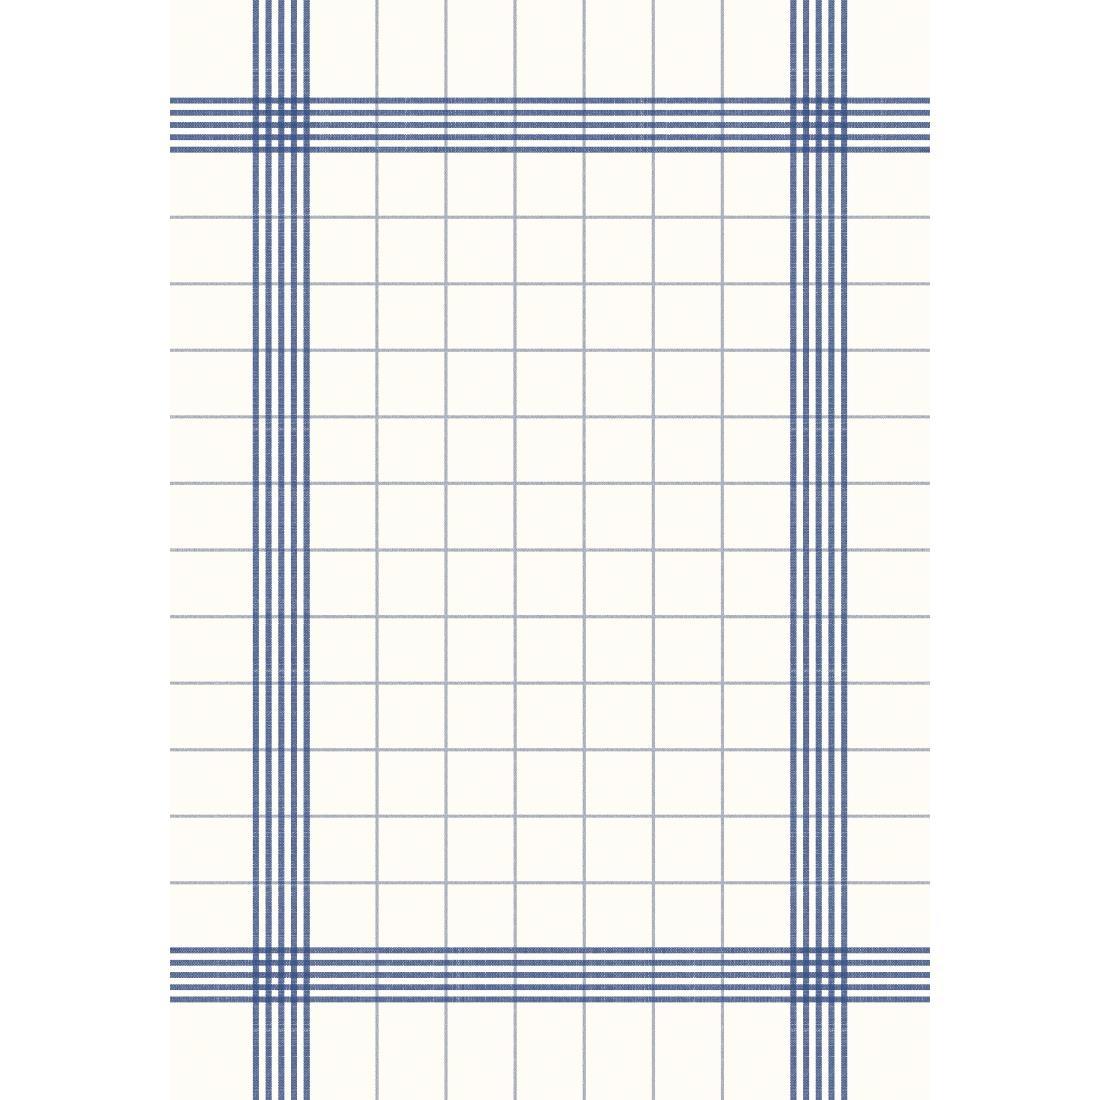 Dunisoft Towel Napkin Blue Check 38x54cm (Pack of 250) - CY523  - 1